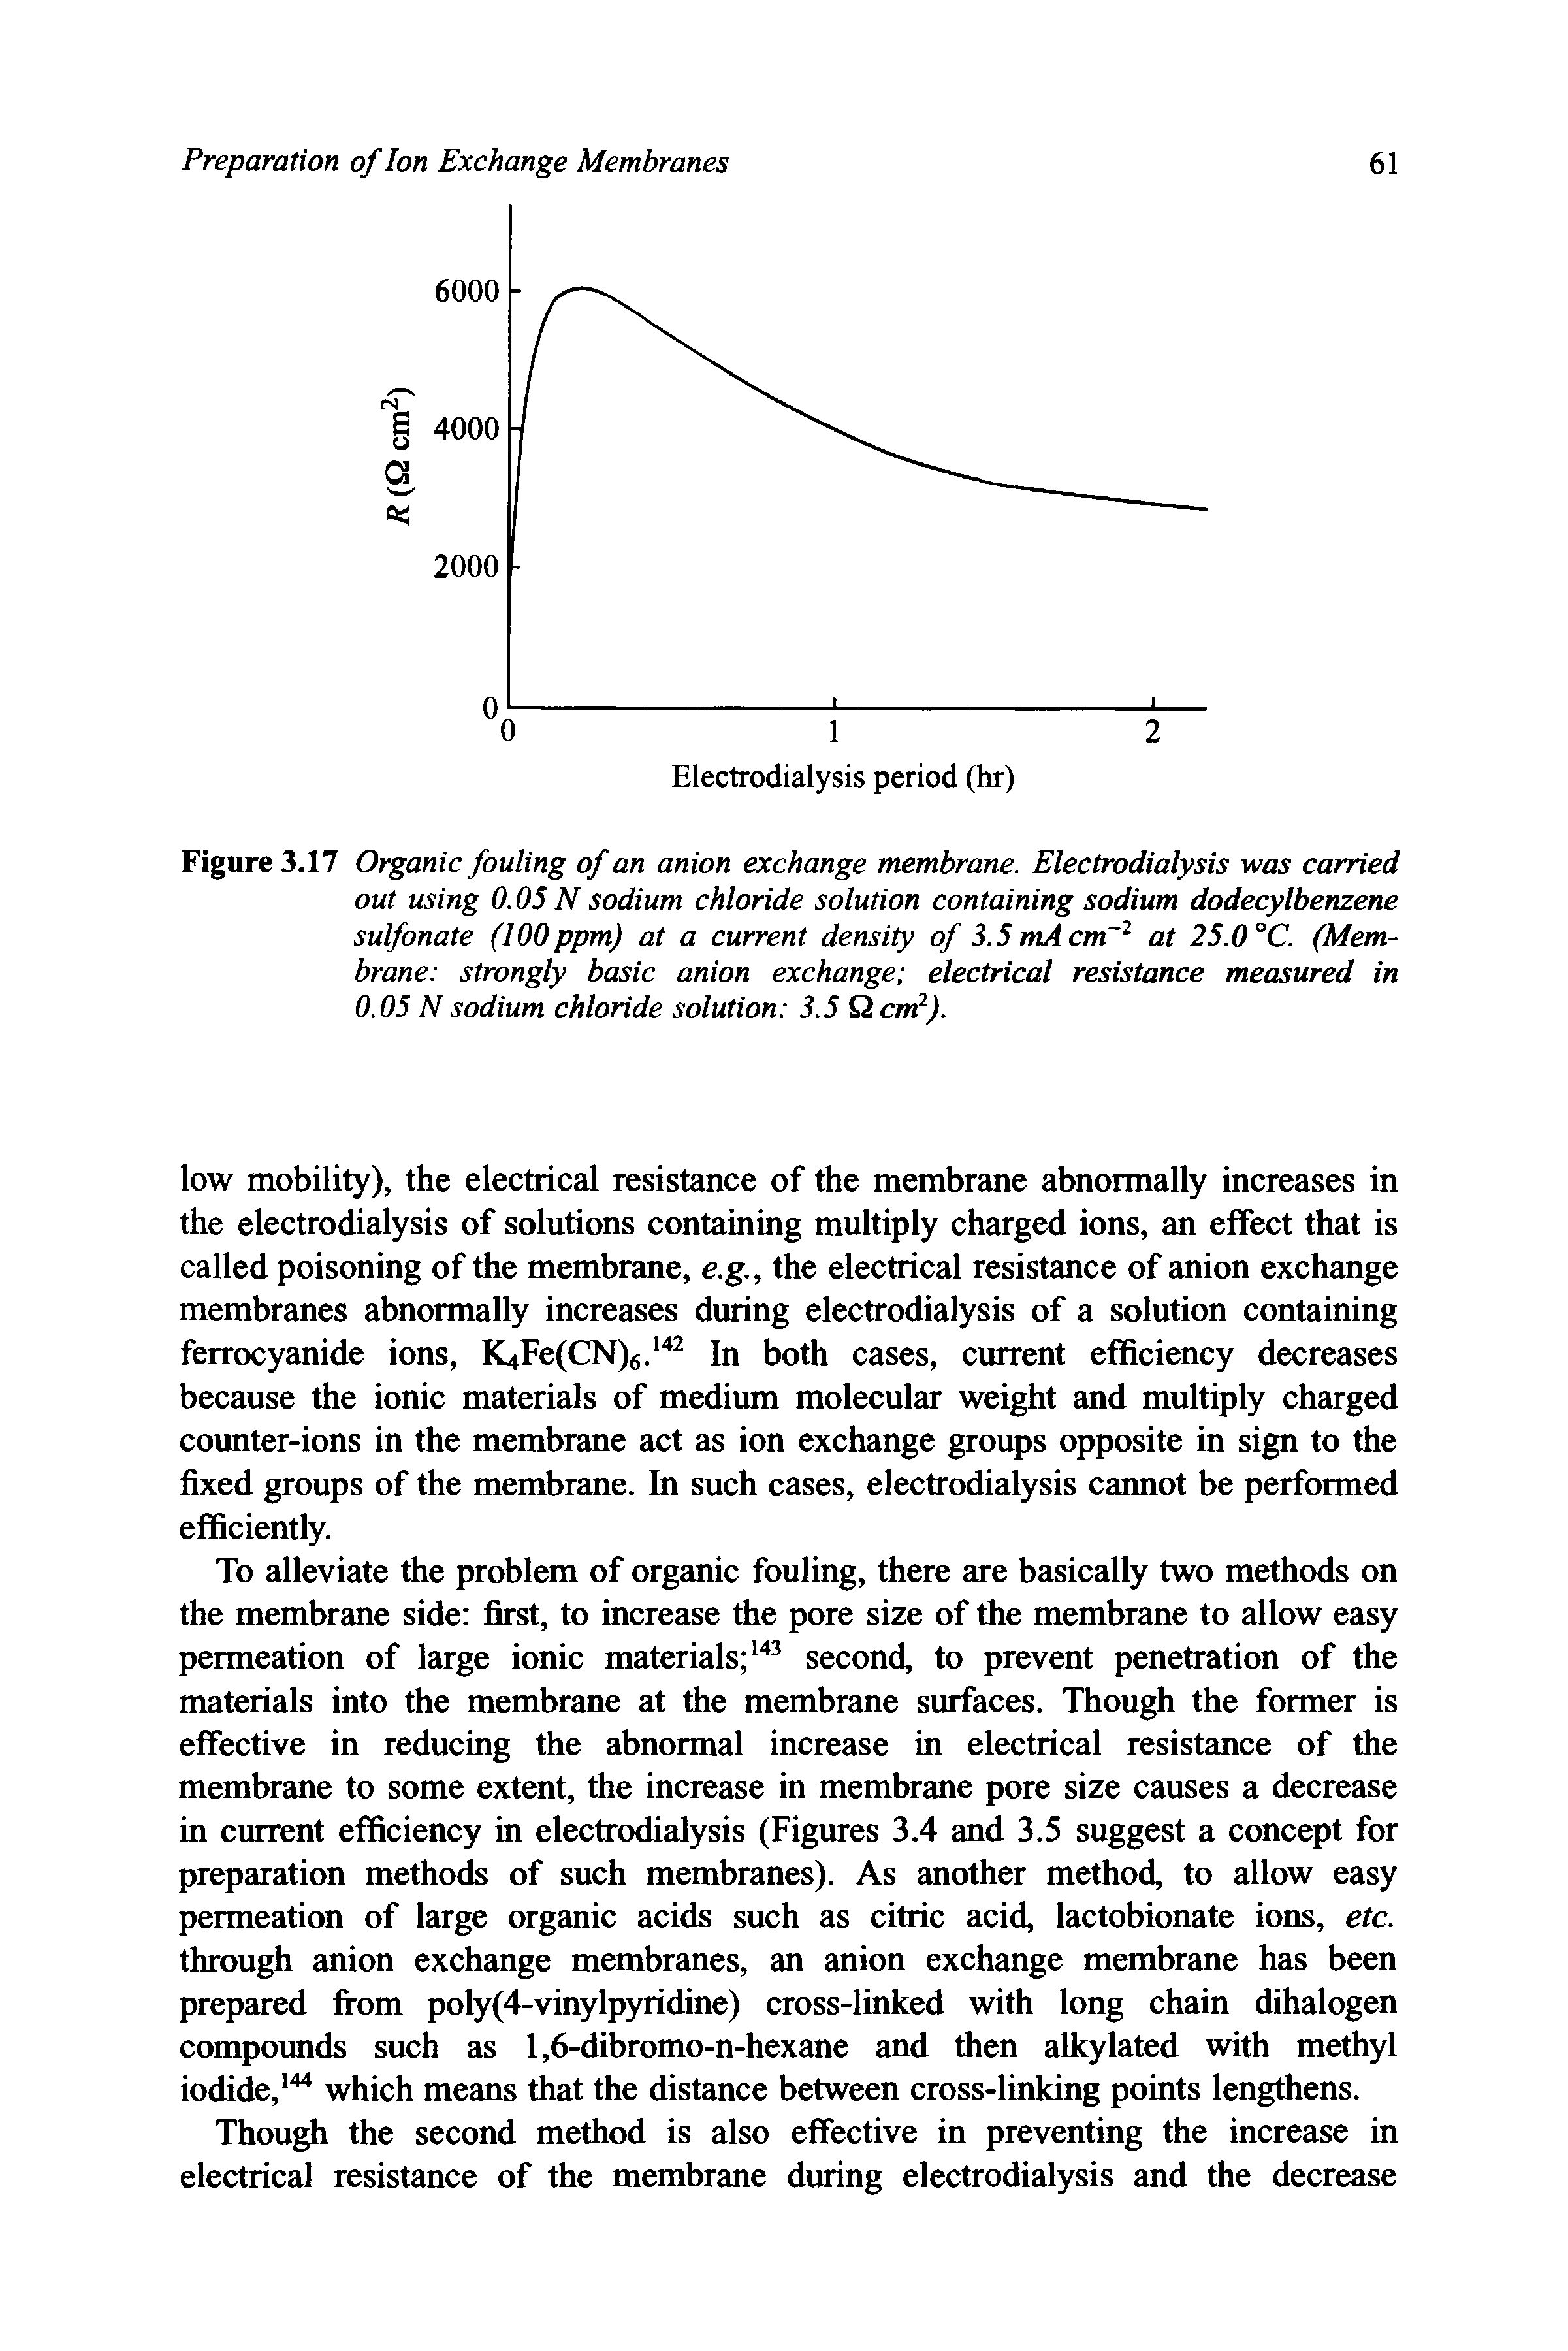 Figure 3.17 Organic fouling of an anion exchange membrane. Electrodialysis was carried out using 0.05 N sodium chloride solution containing sodium dodecylbenzene sulfonate (100ppm) at a current density of 3.5 mA cm 2 at 25.0 °C. (Membrane strongly basic anion exchange electrical resistance measured in 0.05 N sodium chloride solution 3.5 Q cm2).